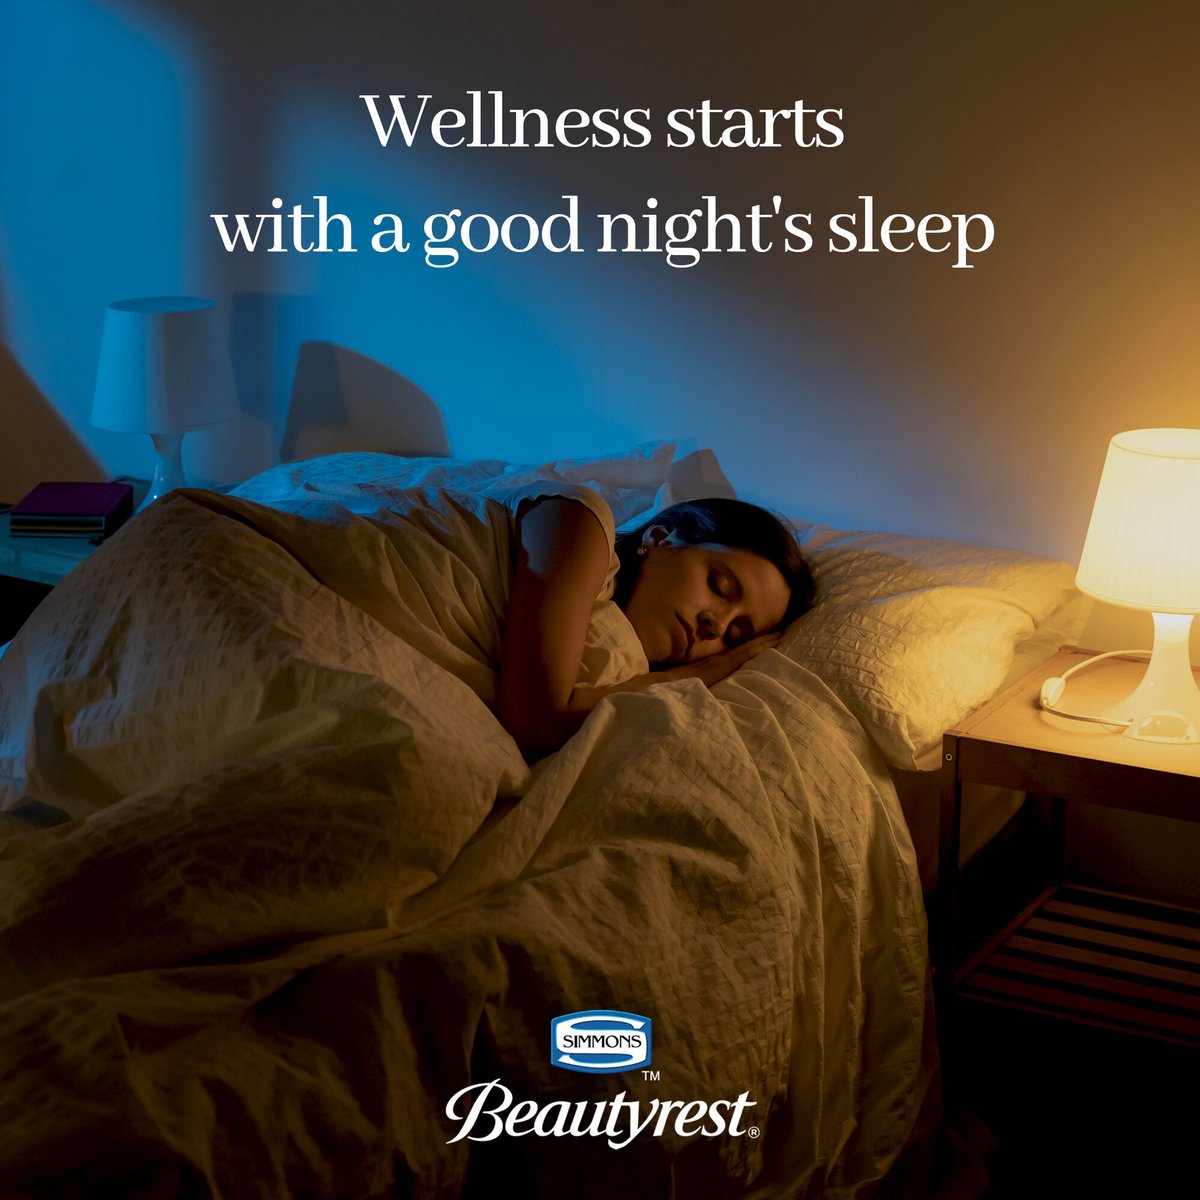 Control your wellness and your #sleep with a #mattress made to support your sleep, body & comfort.

Visit at simmonsbeautyrest.in

#GoodNightSleep #HealthySleep #ComfortableMattress #Simmons #Simmonsbeautyrestindia #beautyrest #simmonsbeautyrest #VFI #LuxuriousMattress